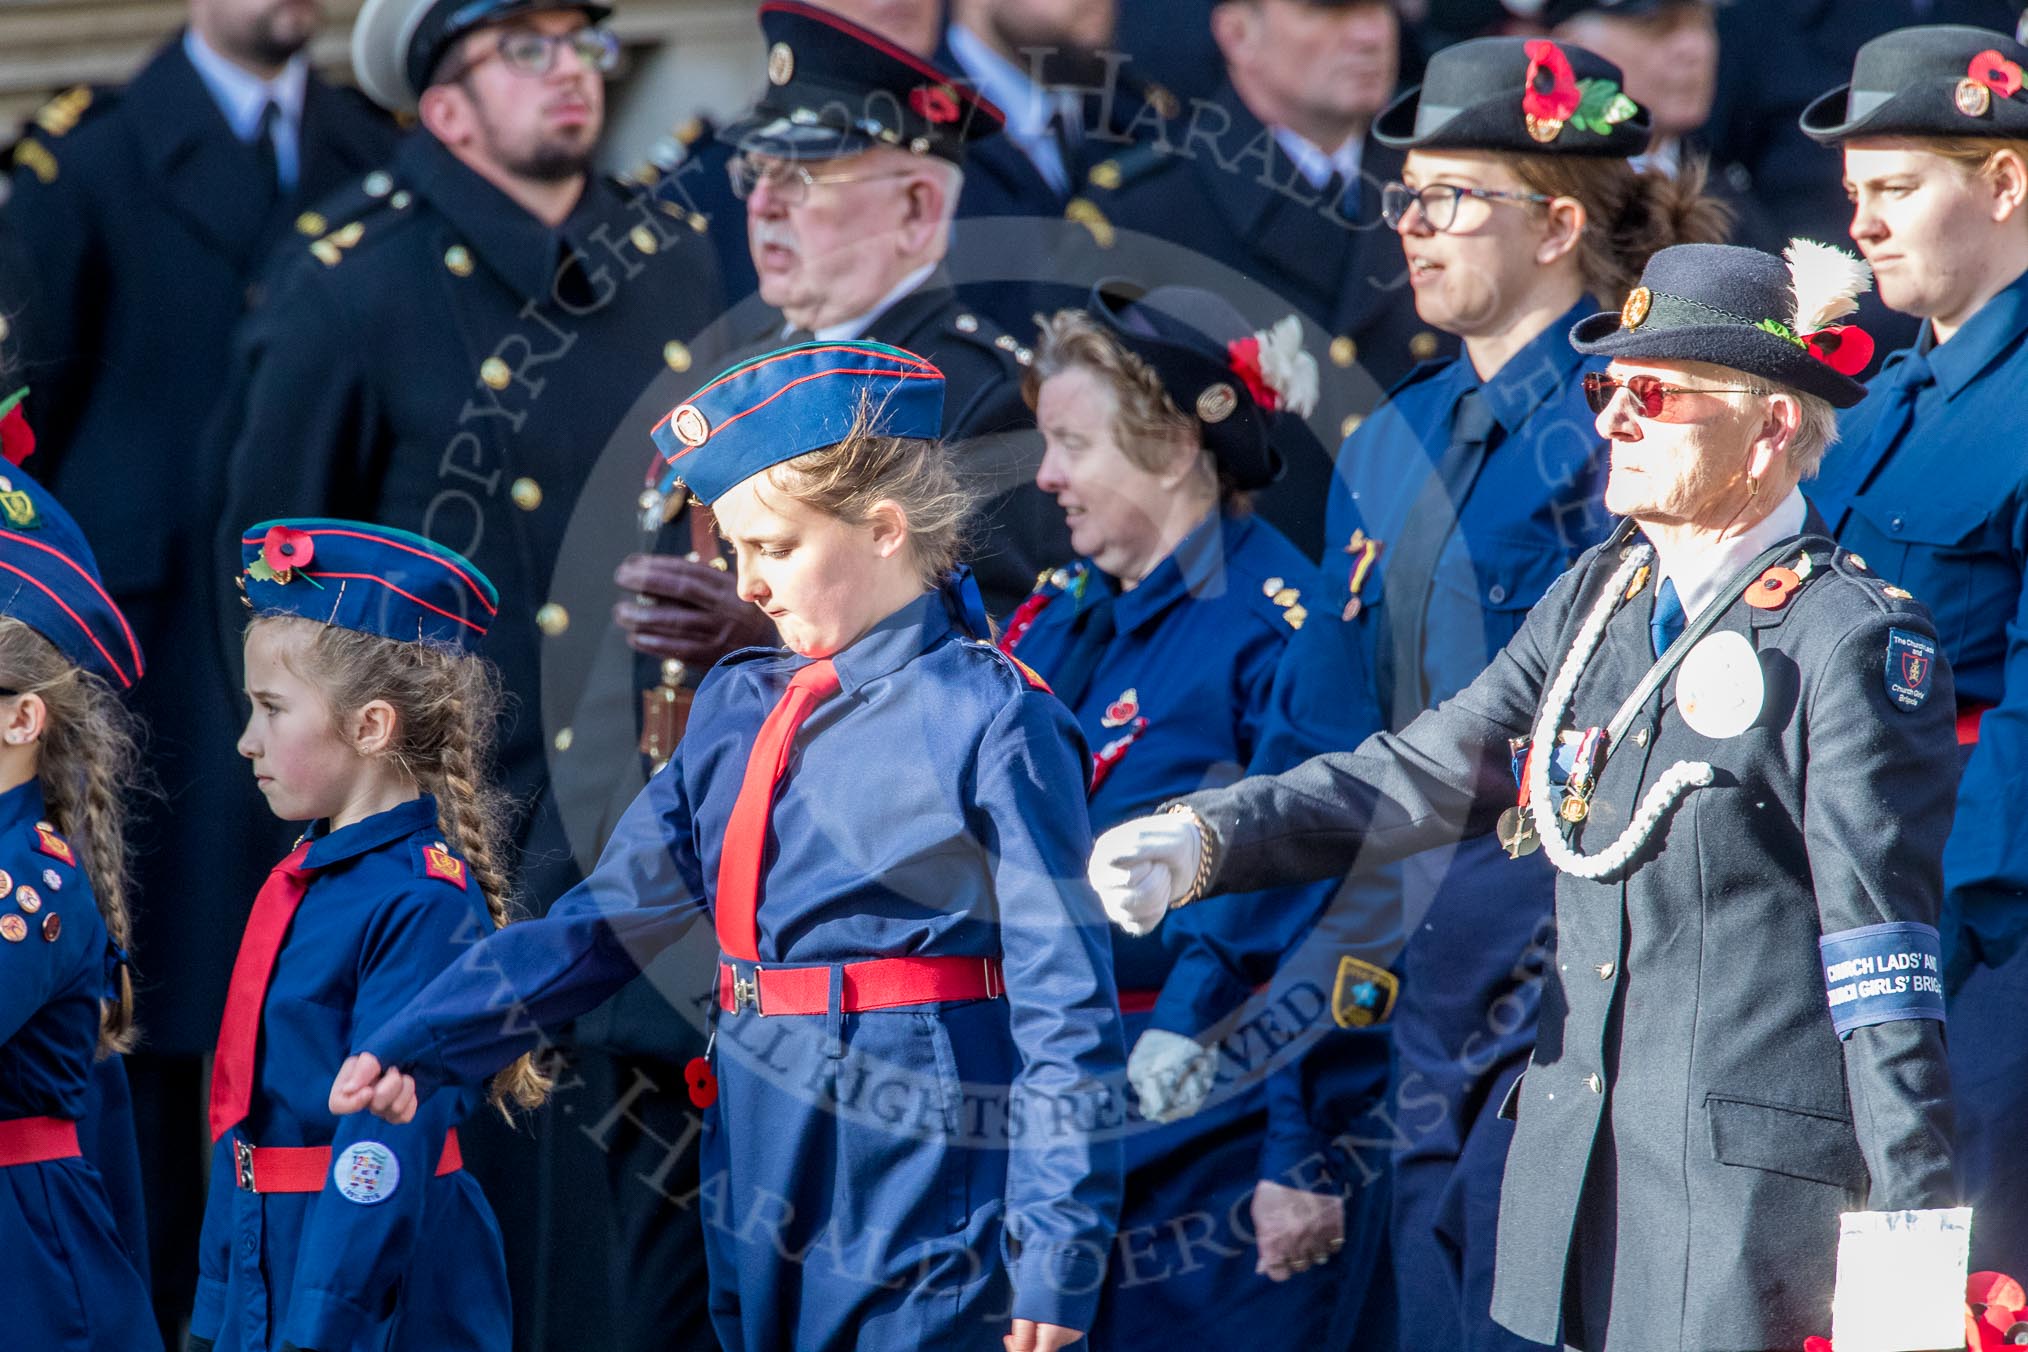 Church Lads' and Church Girls' Brigade (Group M41, 25 members) during the Royal British Legion March Past on Remembrance Sunday at the Cenotaph, Whitehall, Westminster, London, 11 November 2018, 12:30.